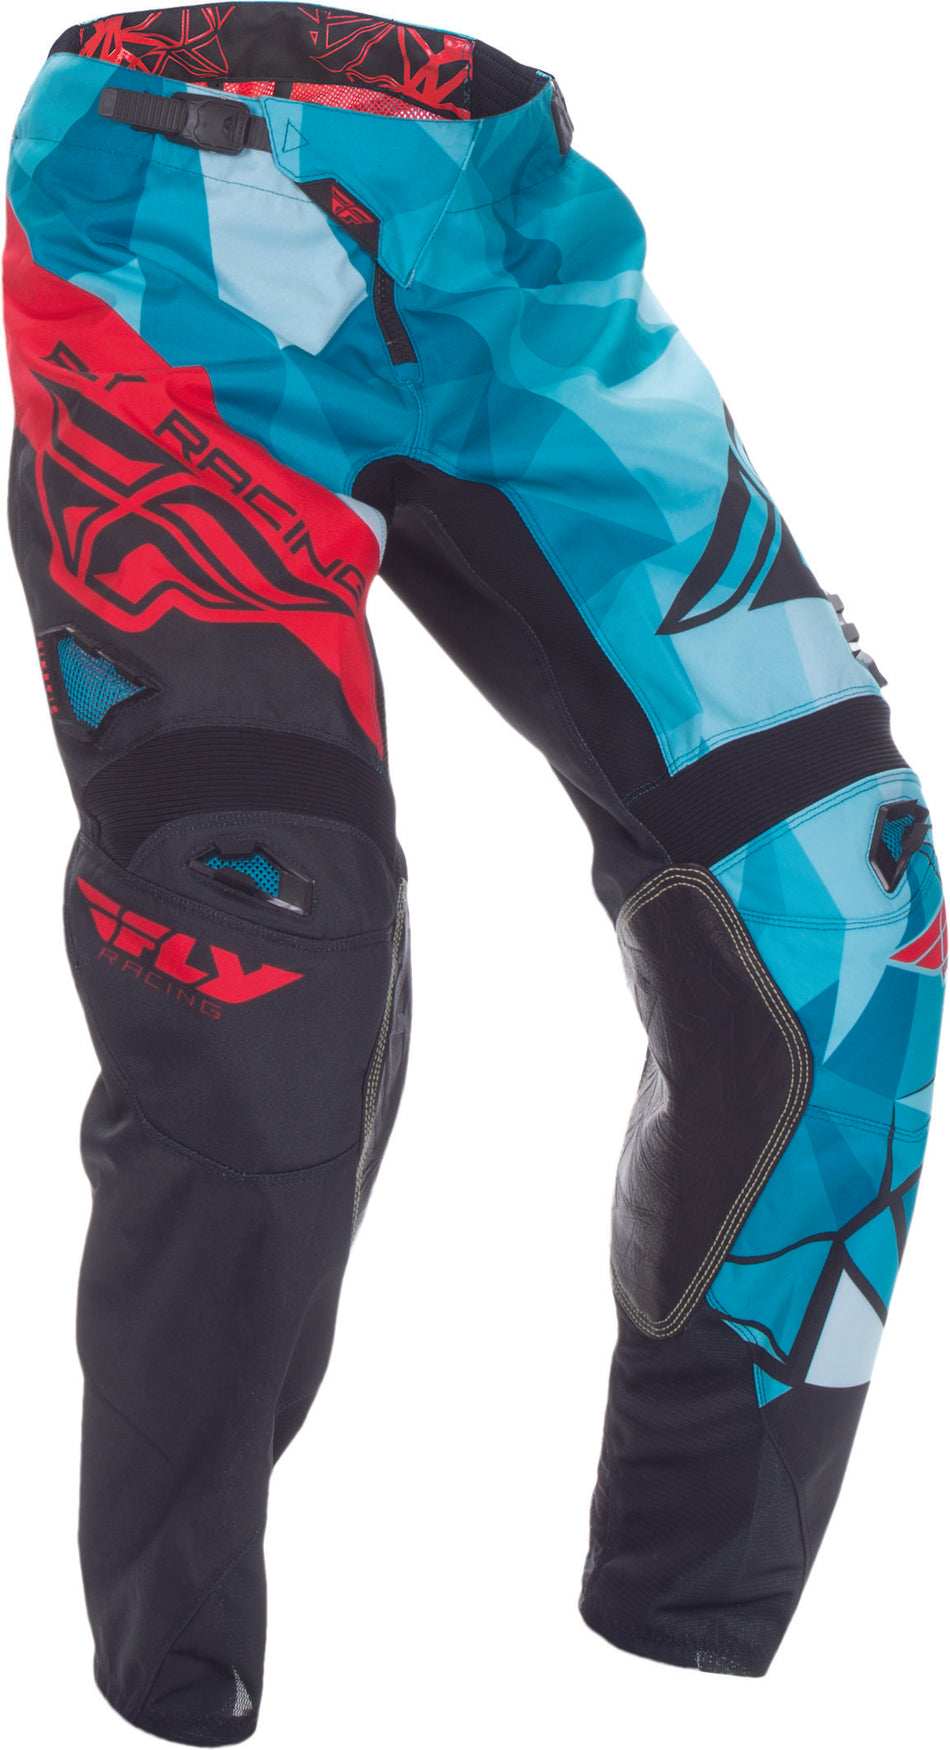 FLY RACING Kinetic Crux Pant Teal/Red Sz 24 370-53924